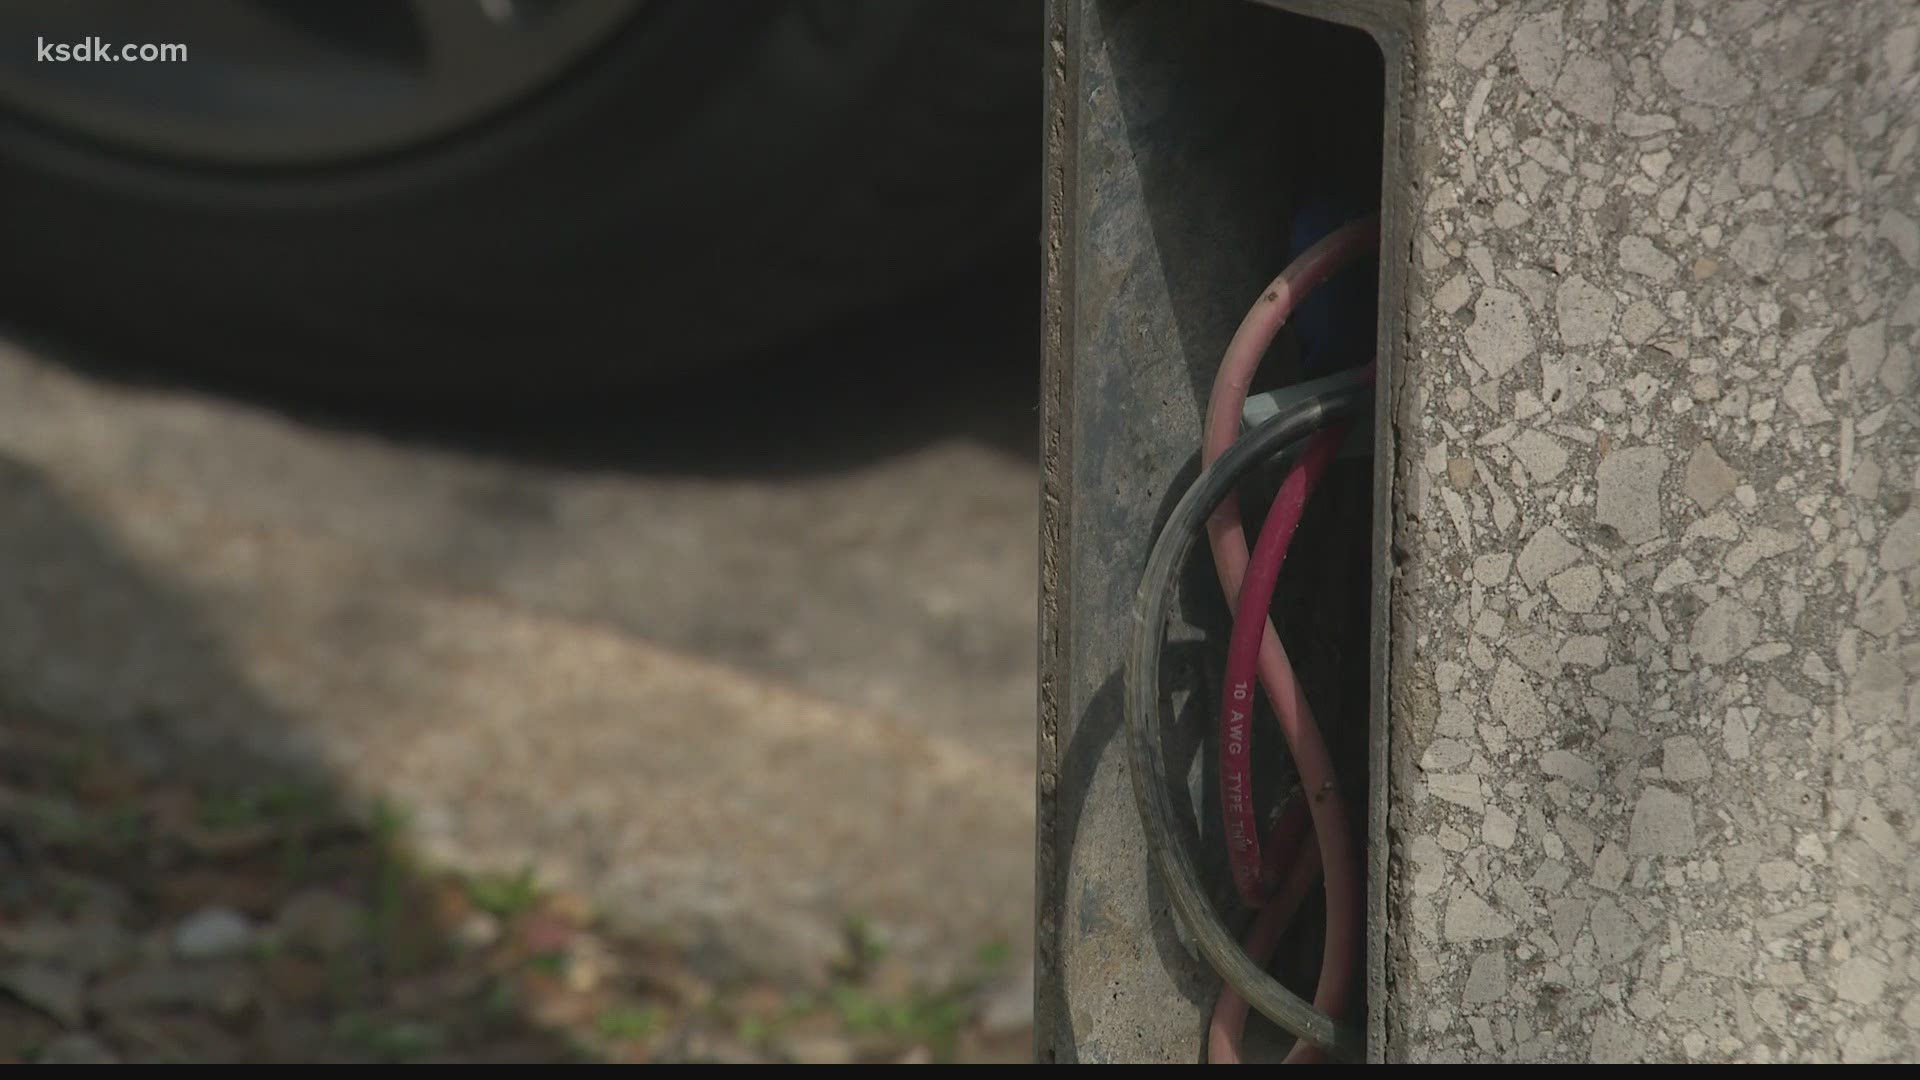 Analysis by the I-Team shows that the city fixes exposed wires and other light pole damage more slowly in neighborhoods where the majority of residents are black